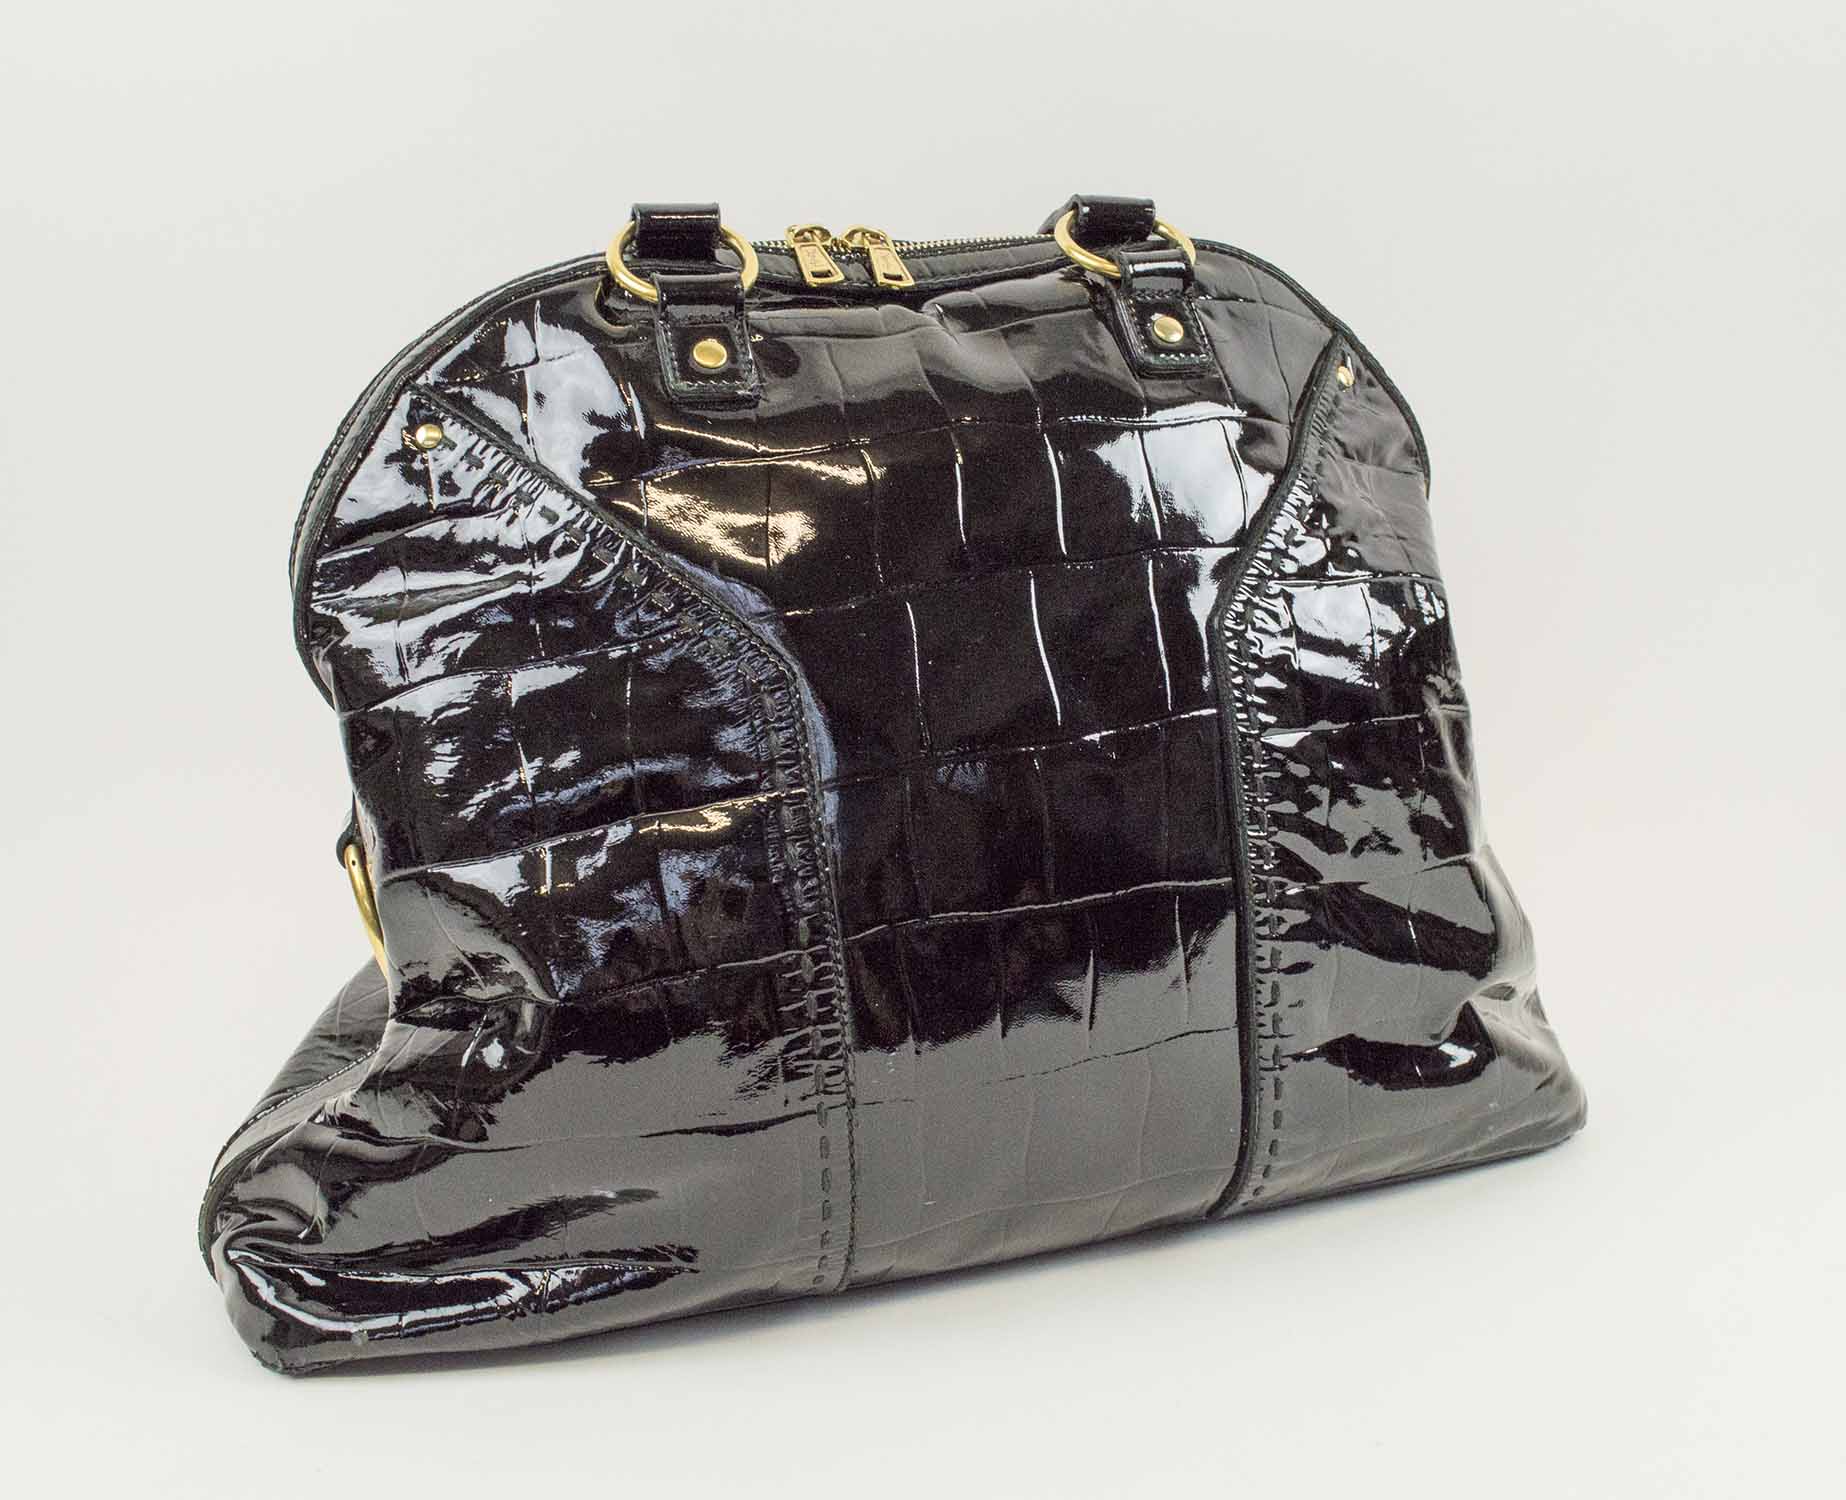 YVES SAINT LAURENT MUSE BAG, black patent leather with zip top 